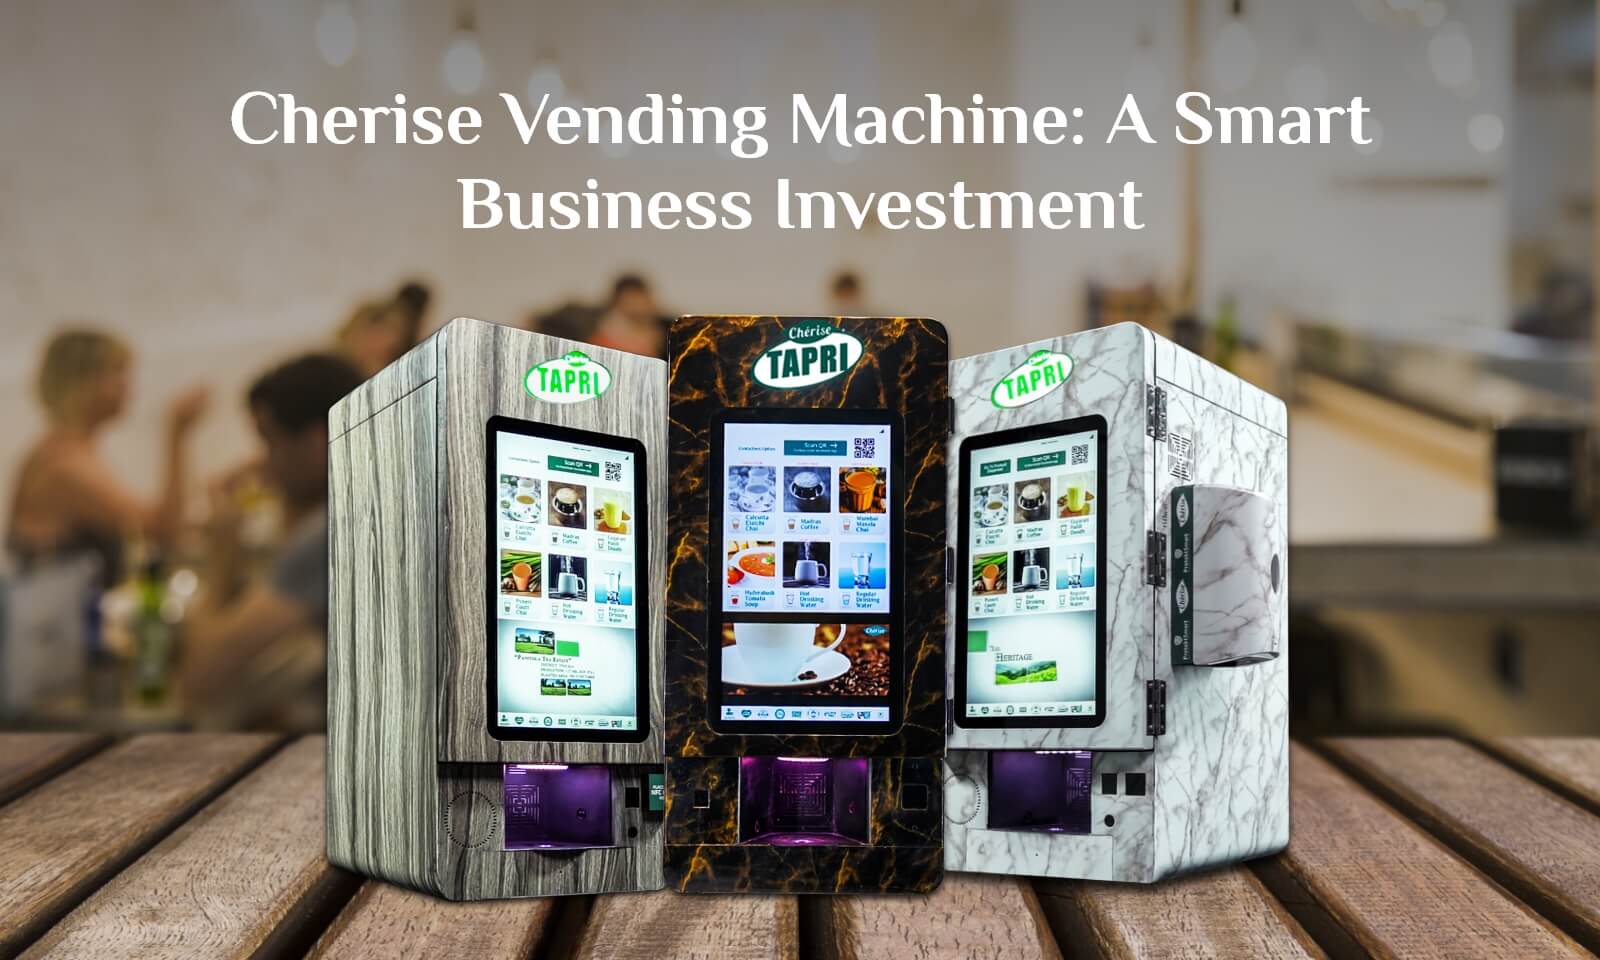 Cherise Vending Machine is a Smart Business Investment